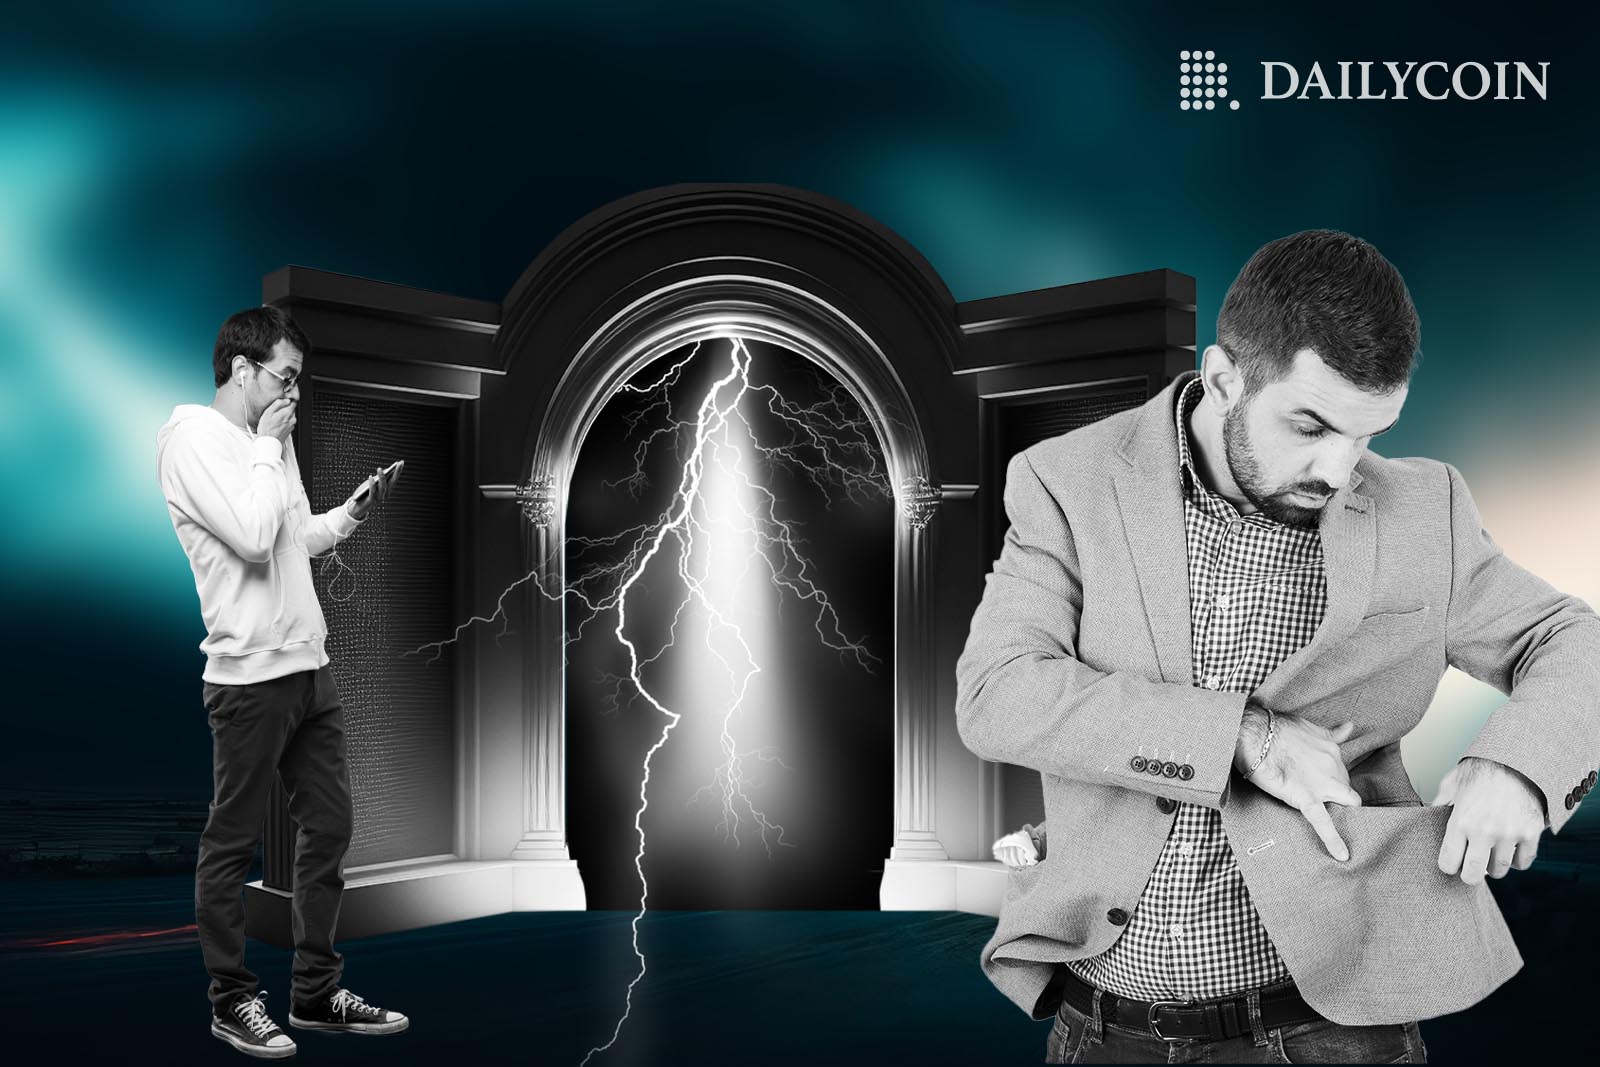 Two men stand in front of a silver gate that has a storm inside it. One man is checking his pockets, finding the empty. The other is checking his phone and gasping in shock.